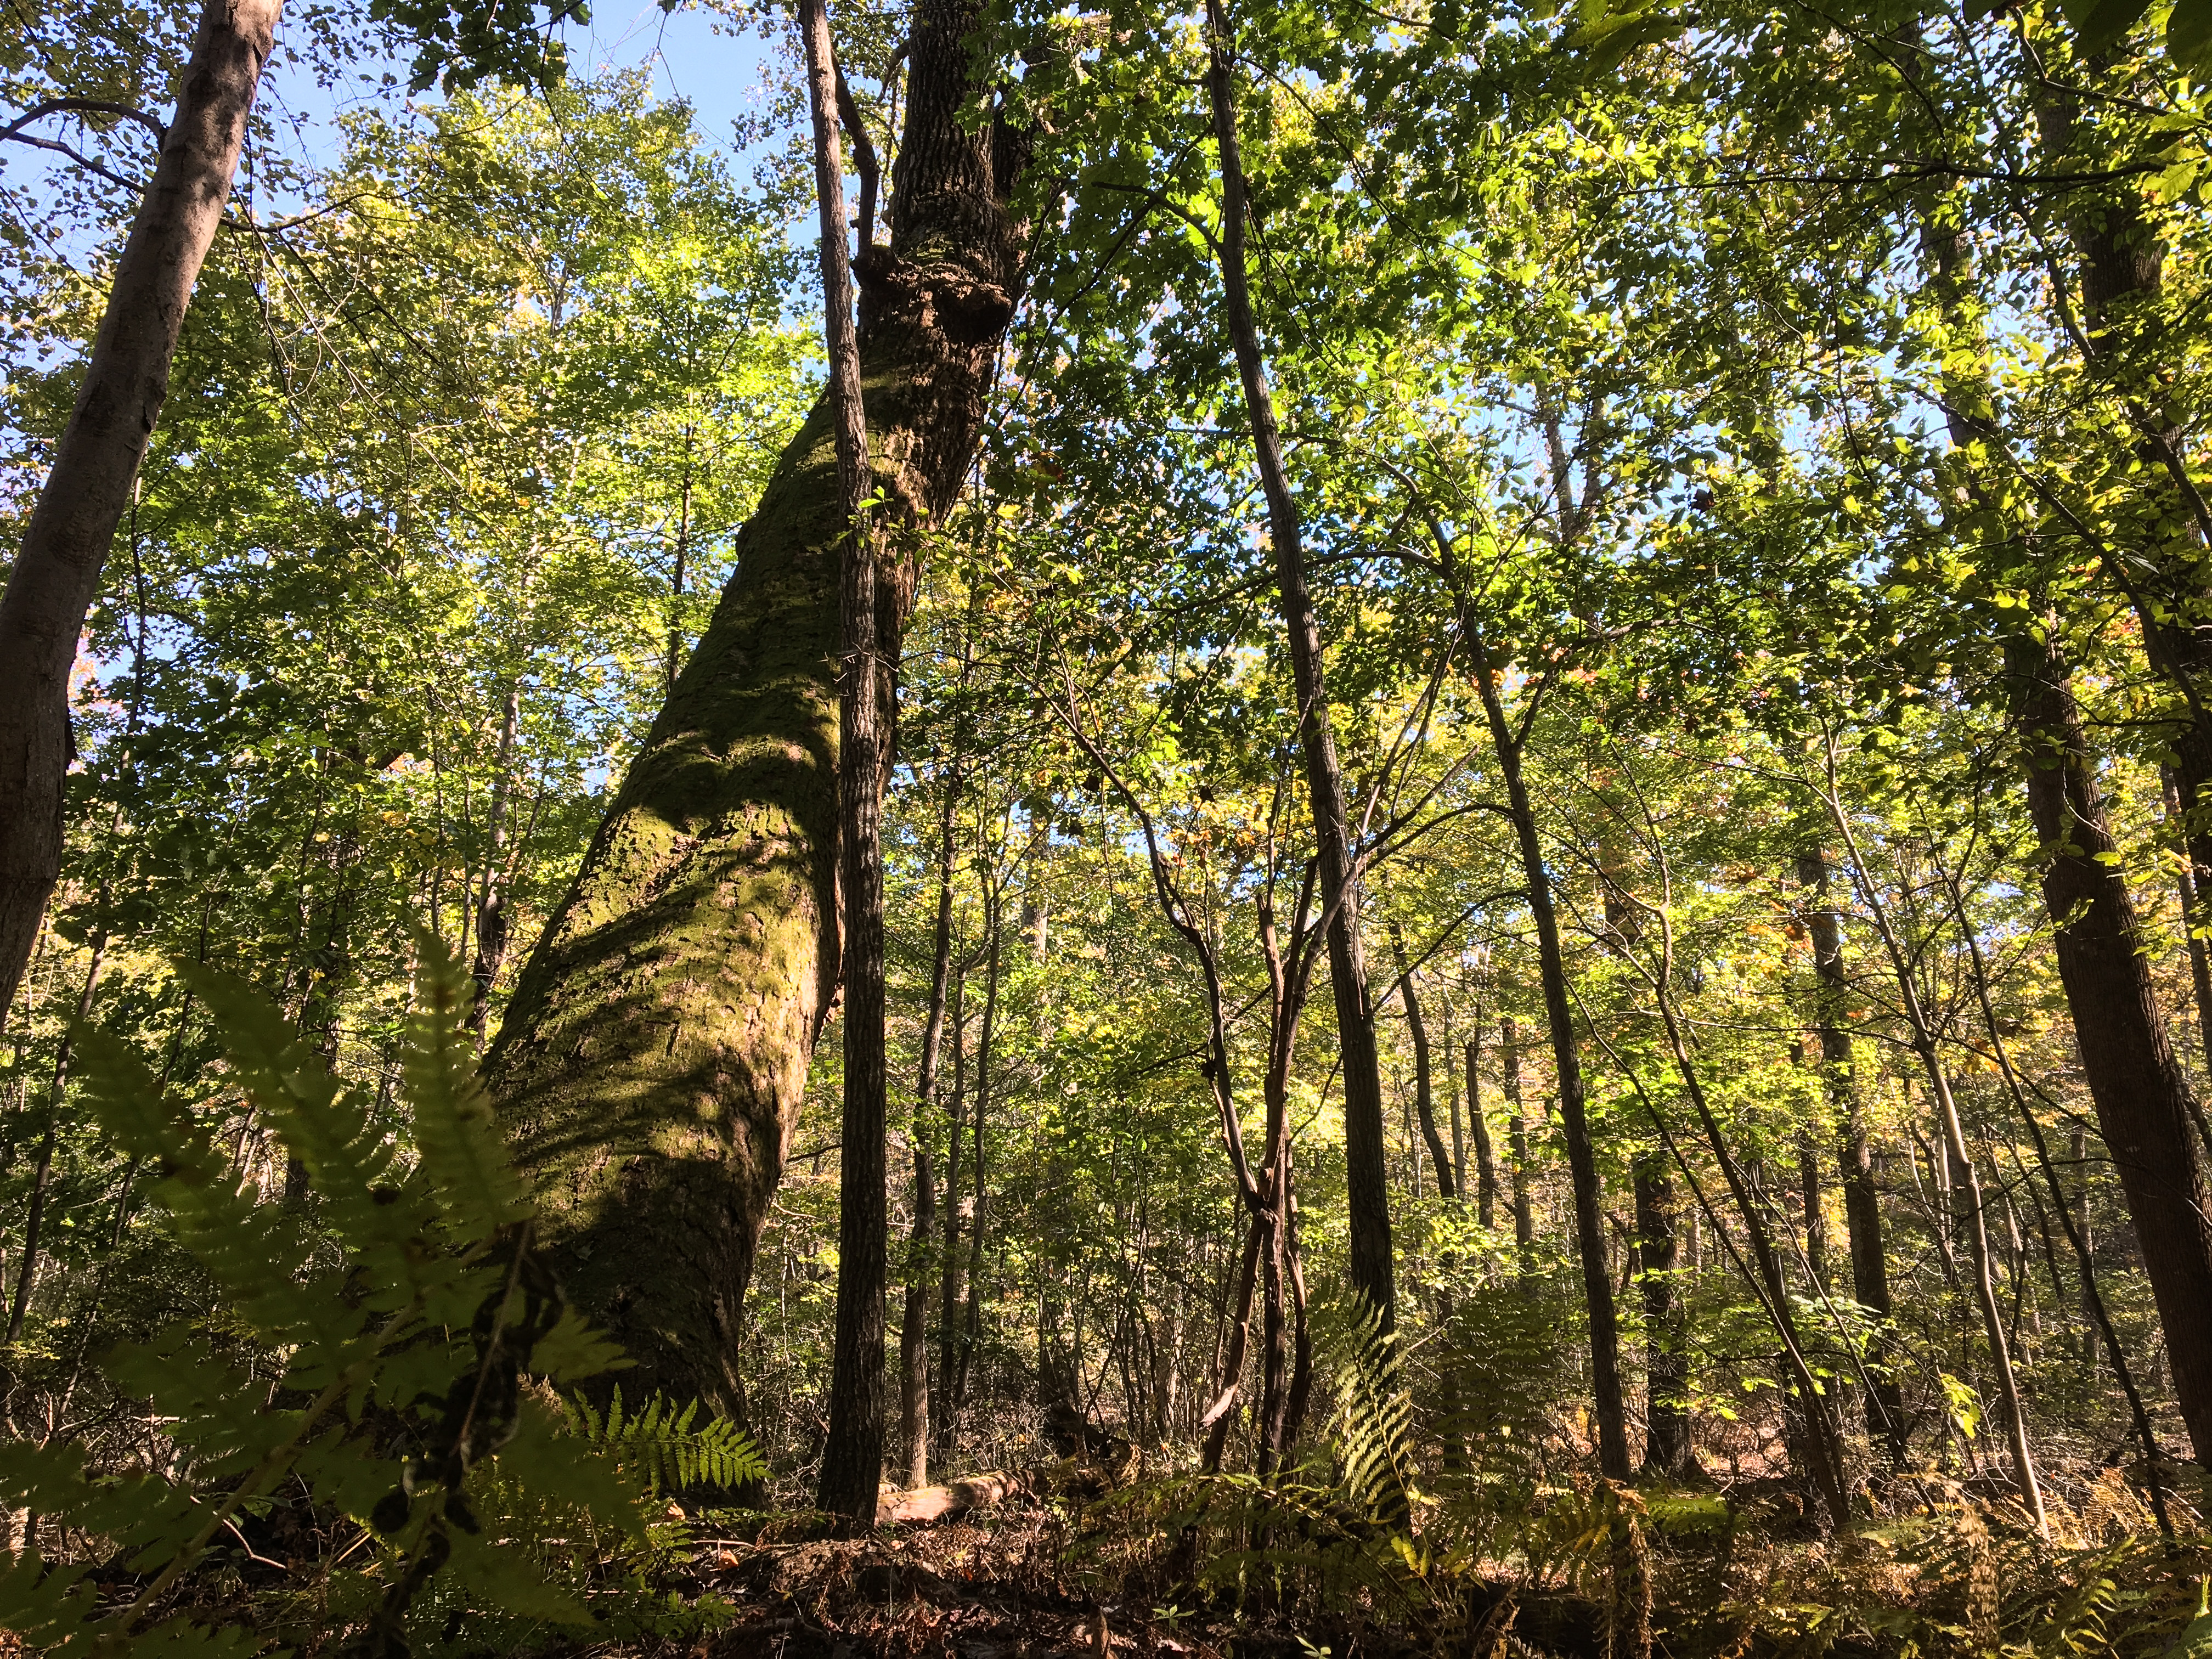 VOF announces $3.6 million for forest conservation in Southwest Virginia